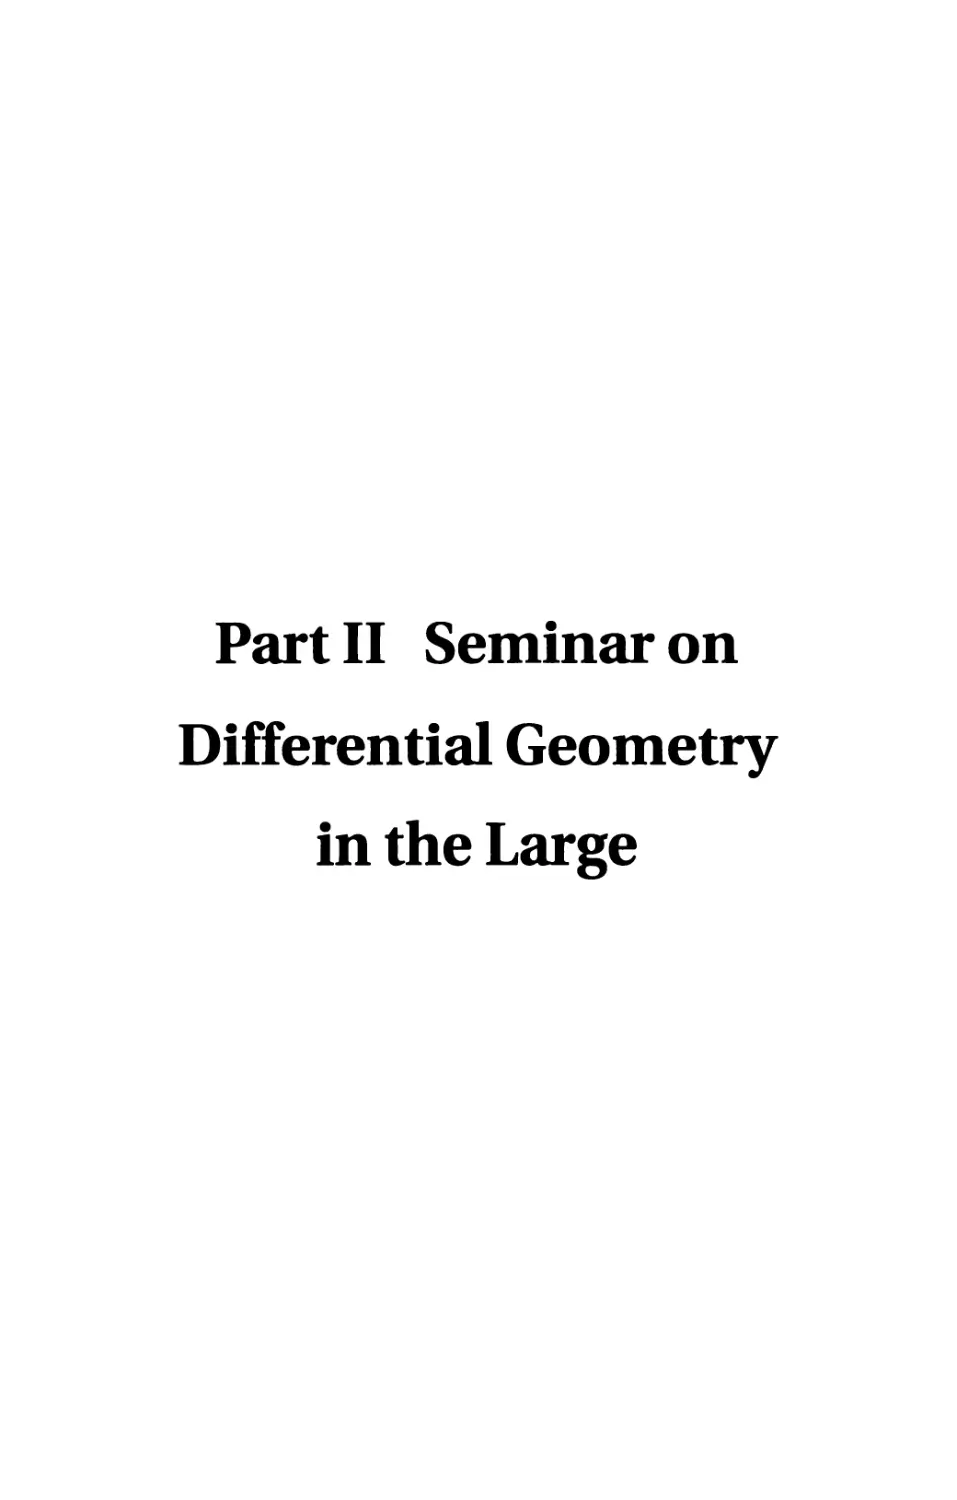 Part II. Seminar on Differential Geometry in the Large